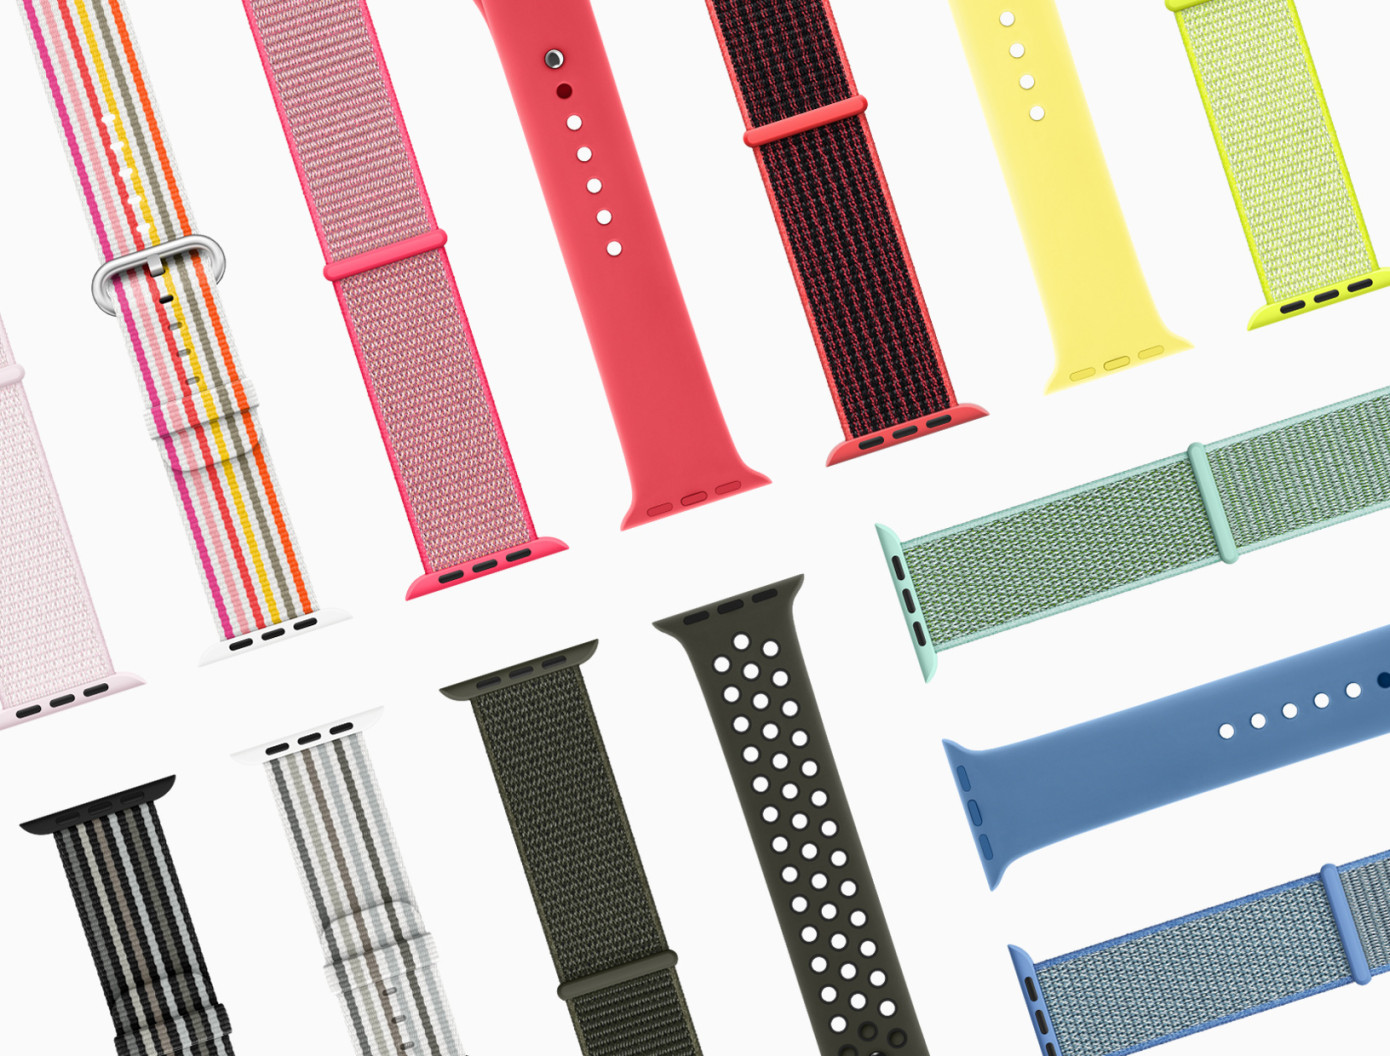  Apple Watch Gets New Bands for Spring